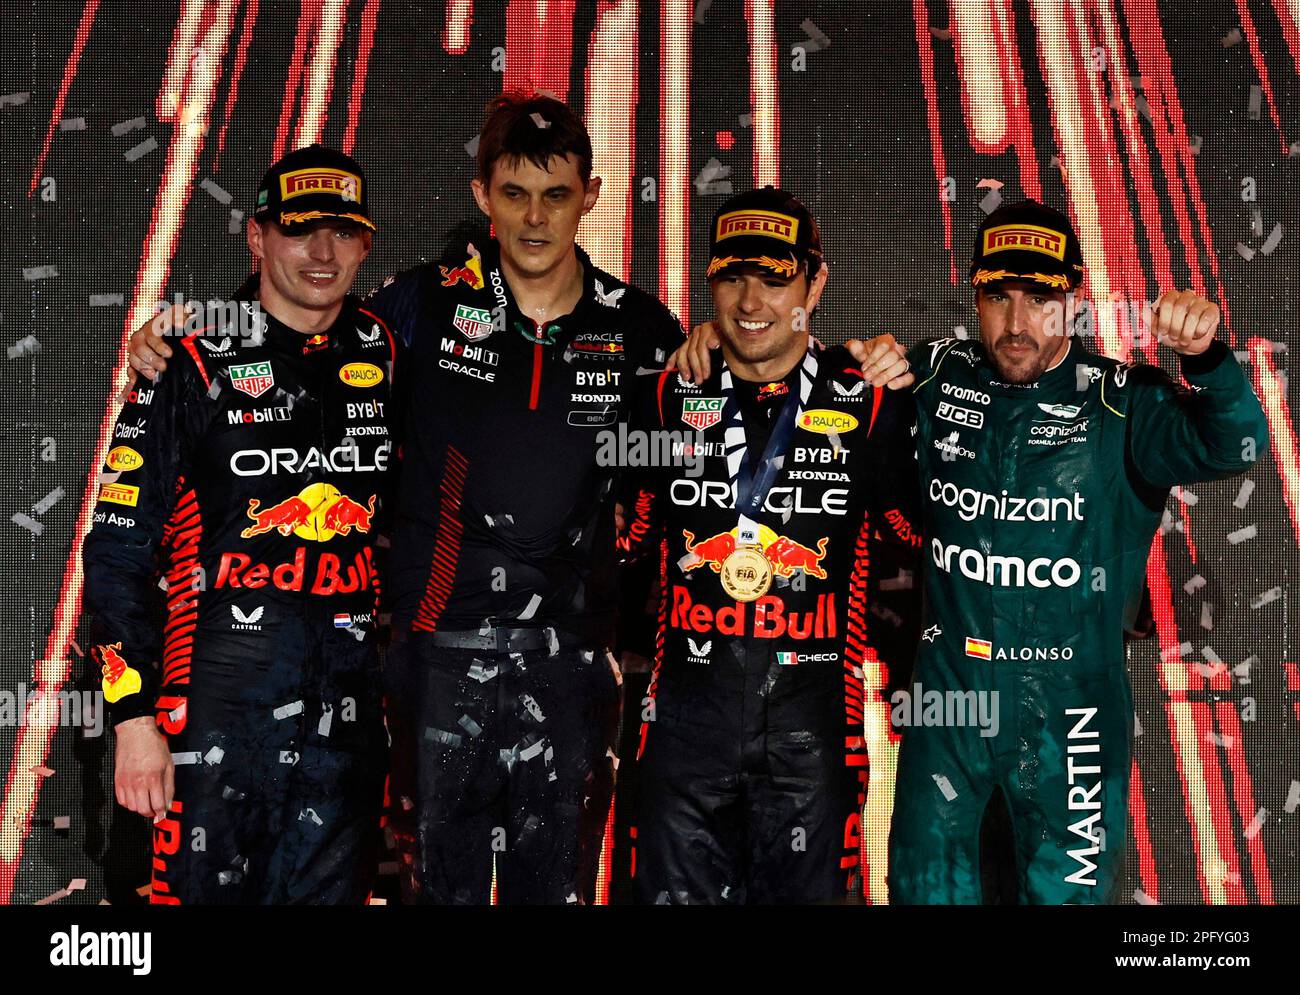 Formula One F1 - Saudi Arabian Grand Prix - Jeddah Corniche Circuit, Jeddah, Saudi Arabia - March 19, 2023 Red Bull's Sergio Perez celebrates on the podium after winning the Saudi Arabian Grand Prix alongside second placed Red Bull's Max Verstappen and third placed Aston Martin's Fernando Alonso before he is handed a 10 second time penalty that drops him to fourth place in the final results REUTERS/Hamad I Mohammed Stock Photo